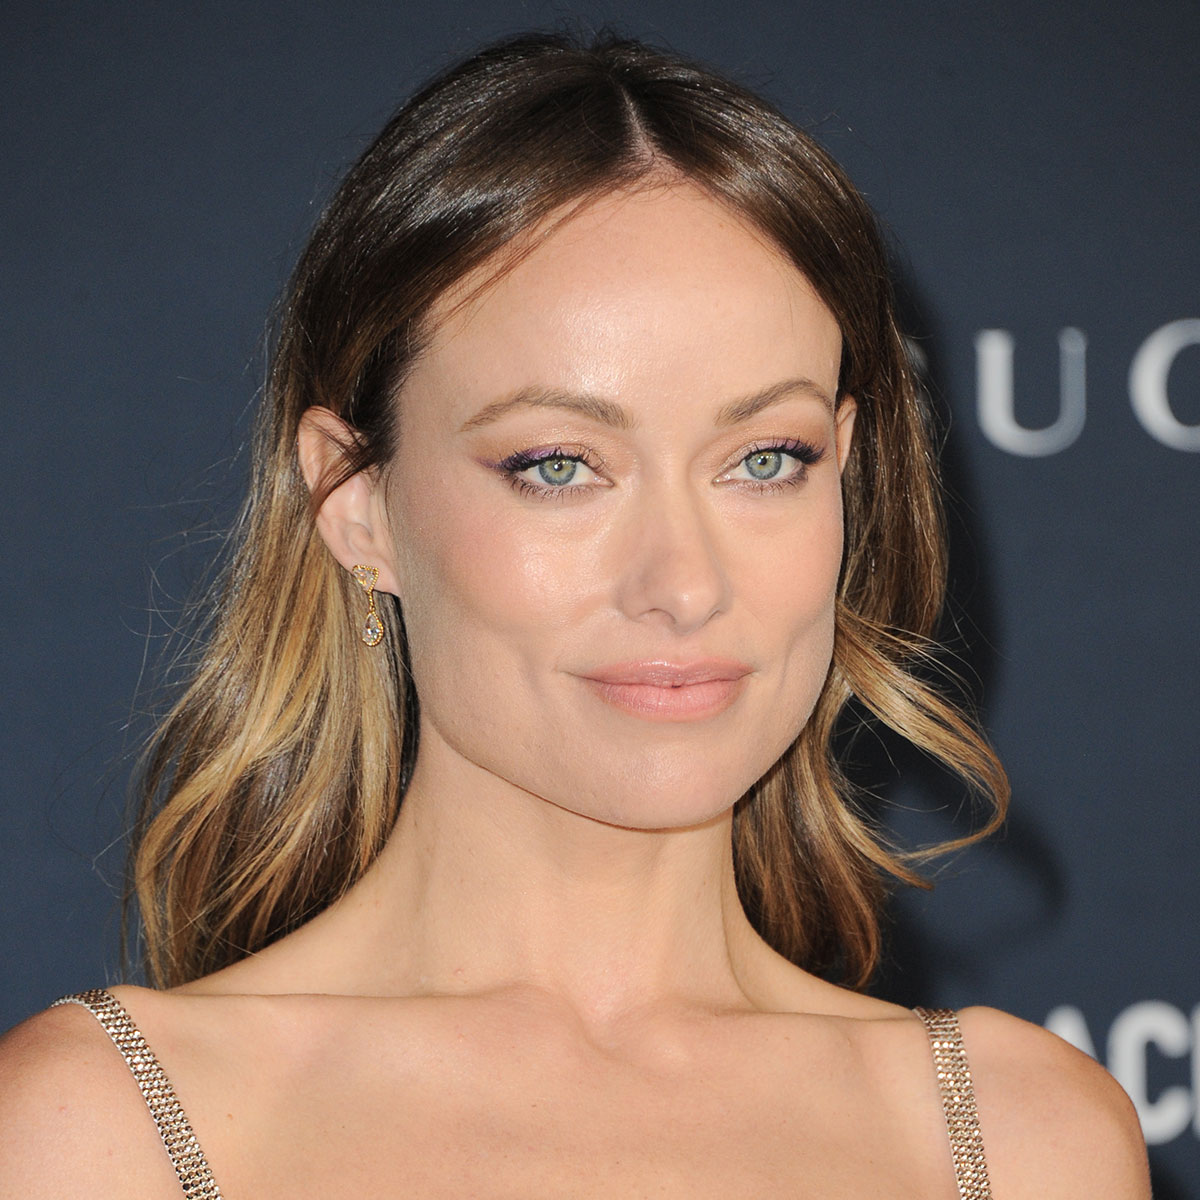 Olivia Wilde Flaunts Her Toned Abs And Legs In A Sports Bra And Leggings